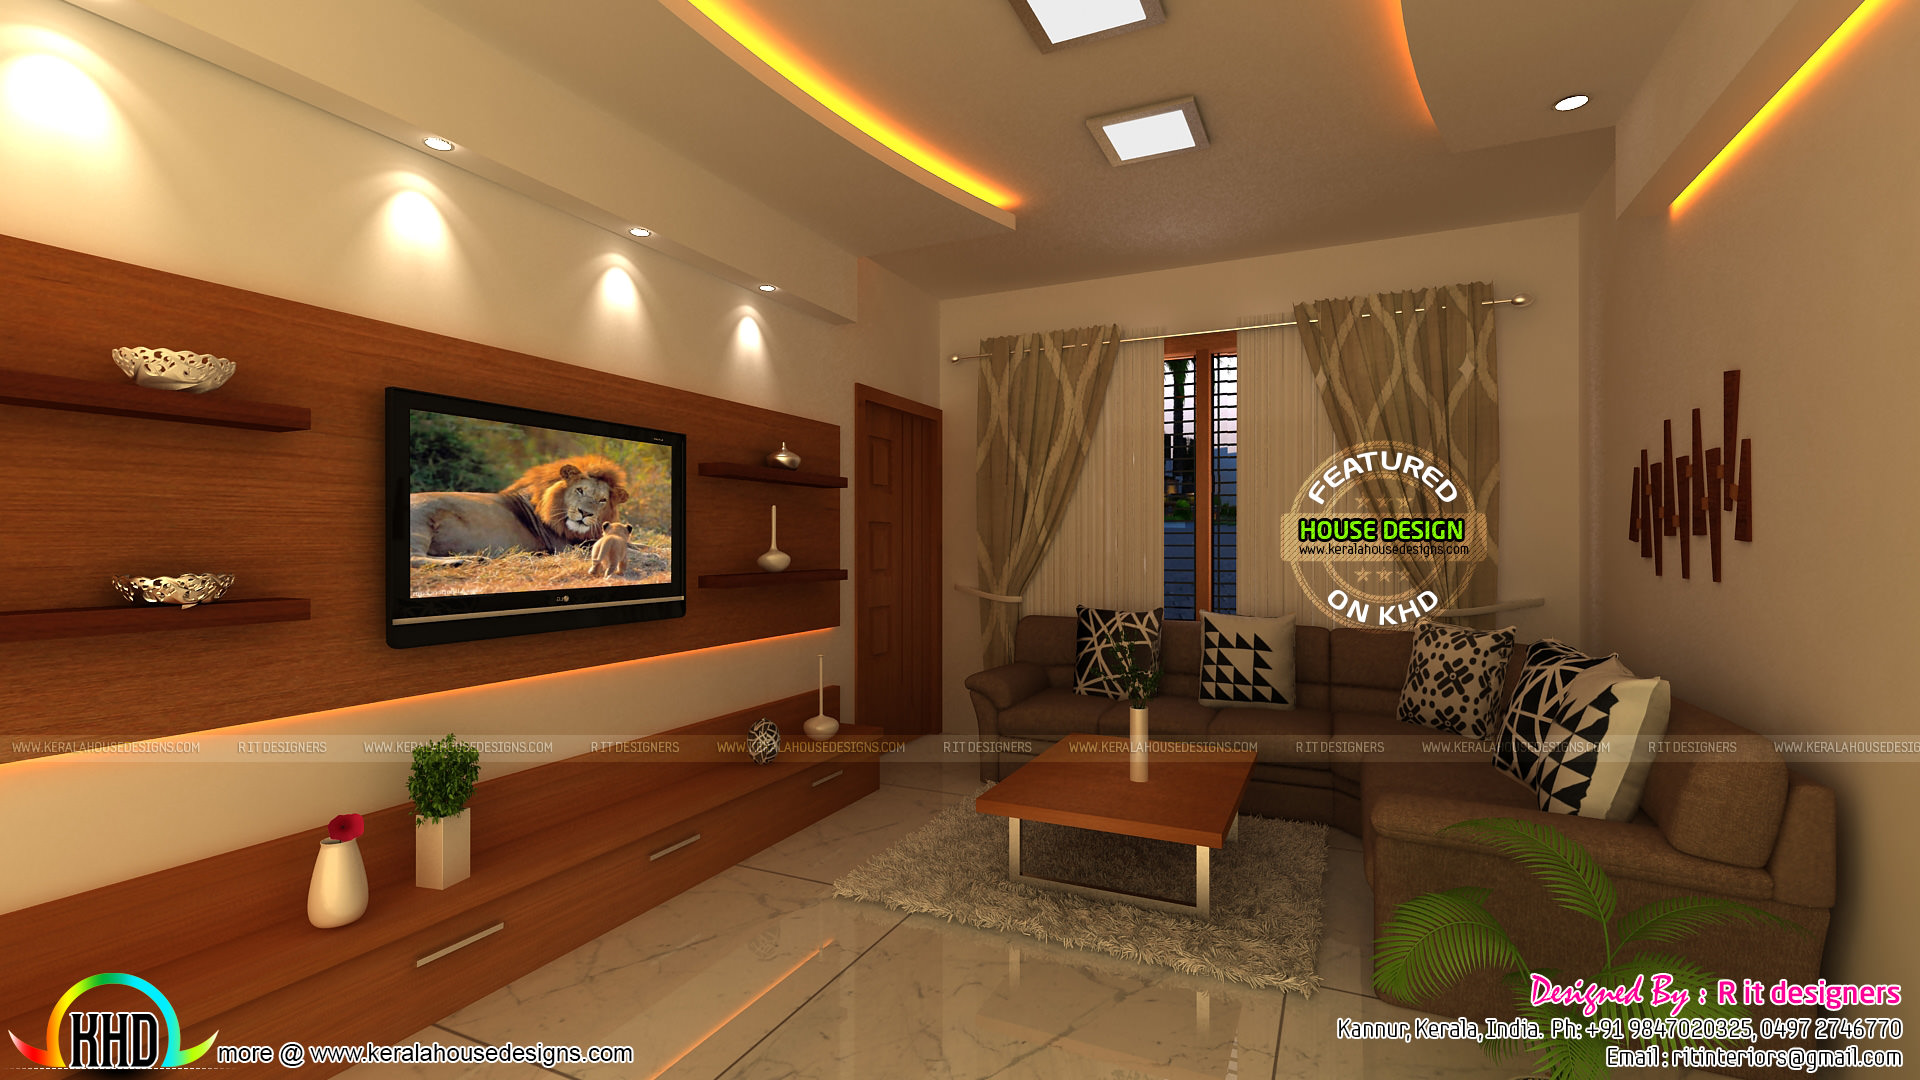 Kitchen, dining and living interior designs Kerala home design and